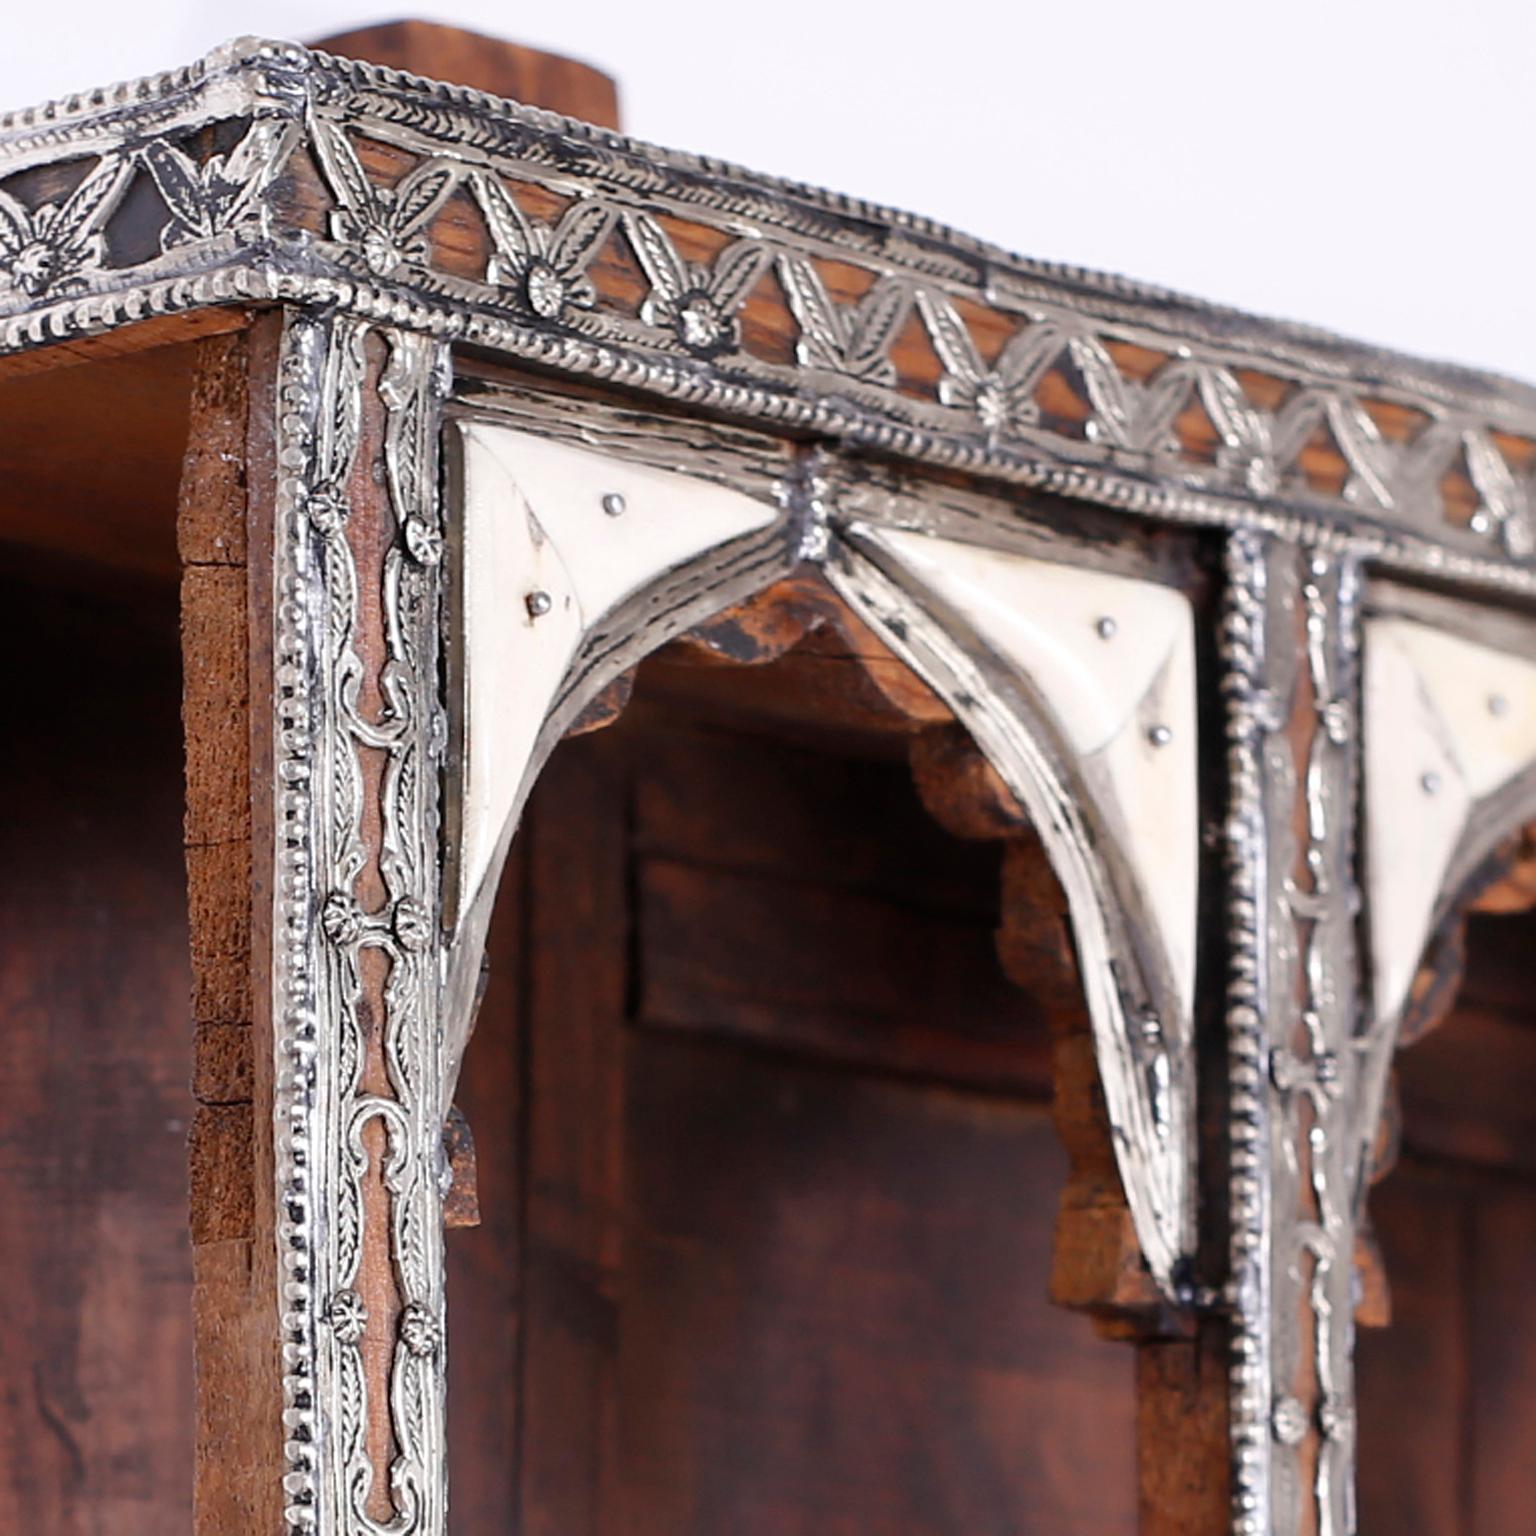 Antique Moroccan wall display shelf with a charming rustic ambiance crafted in mahogany with architectural Moorish arches and nooks. Featuring hand-hammered geometric and floral applied silvered metal designs and highlighted with bone.